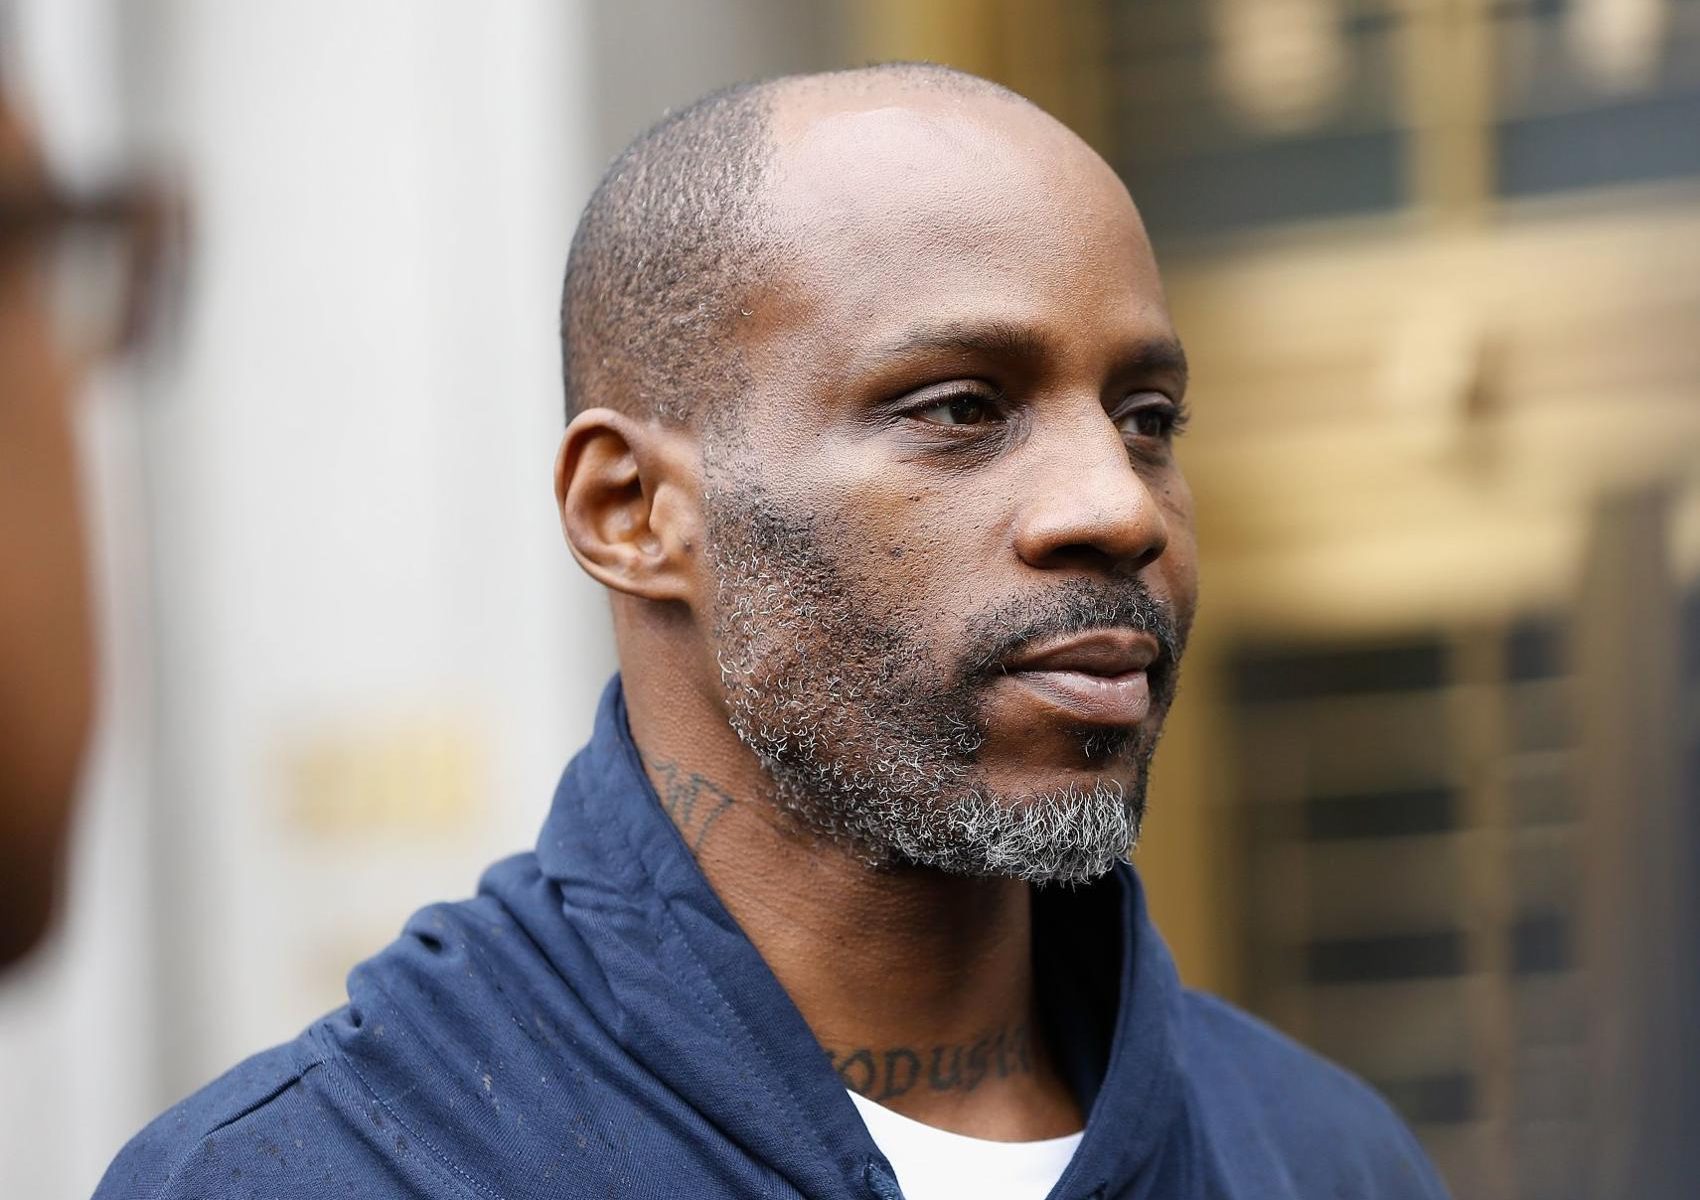 DMX checks into rehab and cancels concerts in 'ongoing commitment' to his sobriety